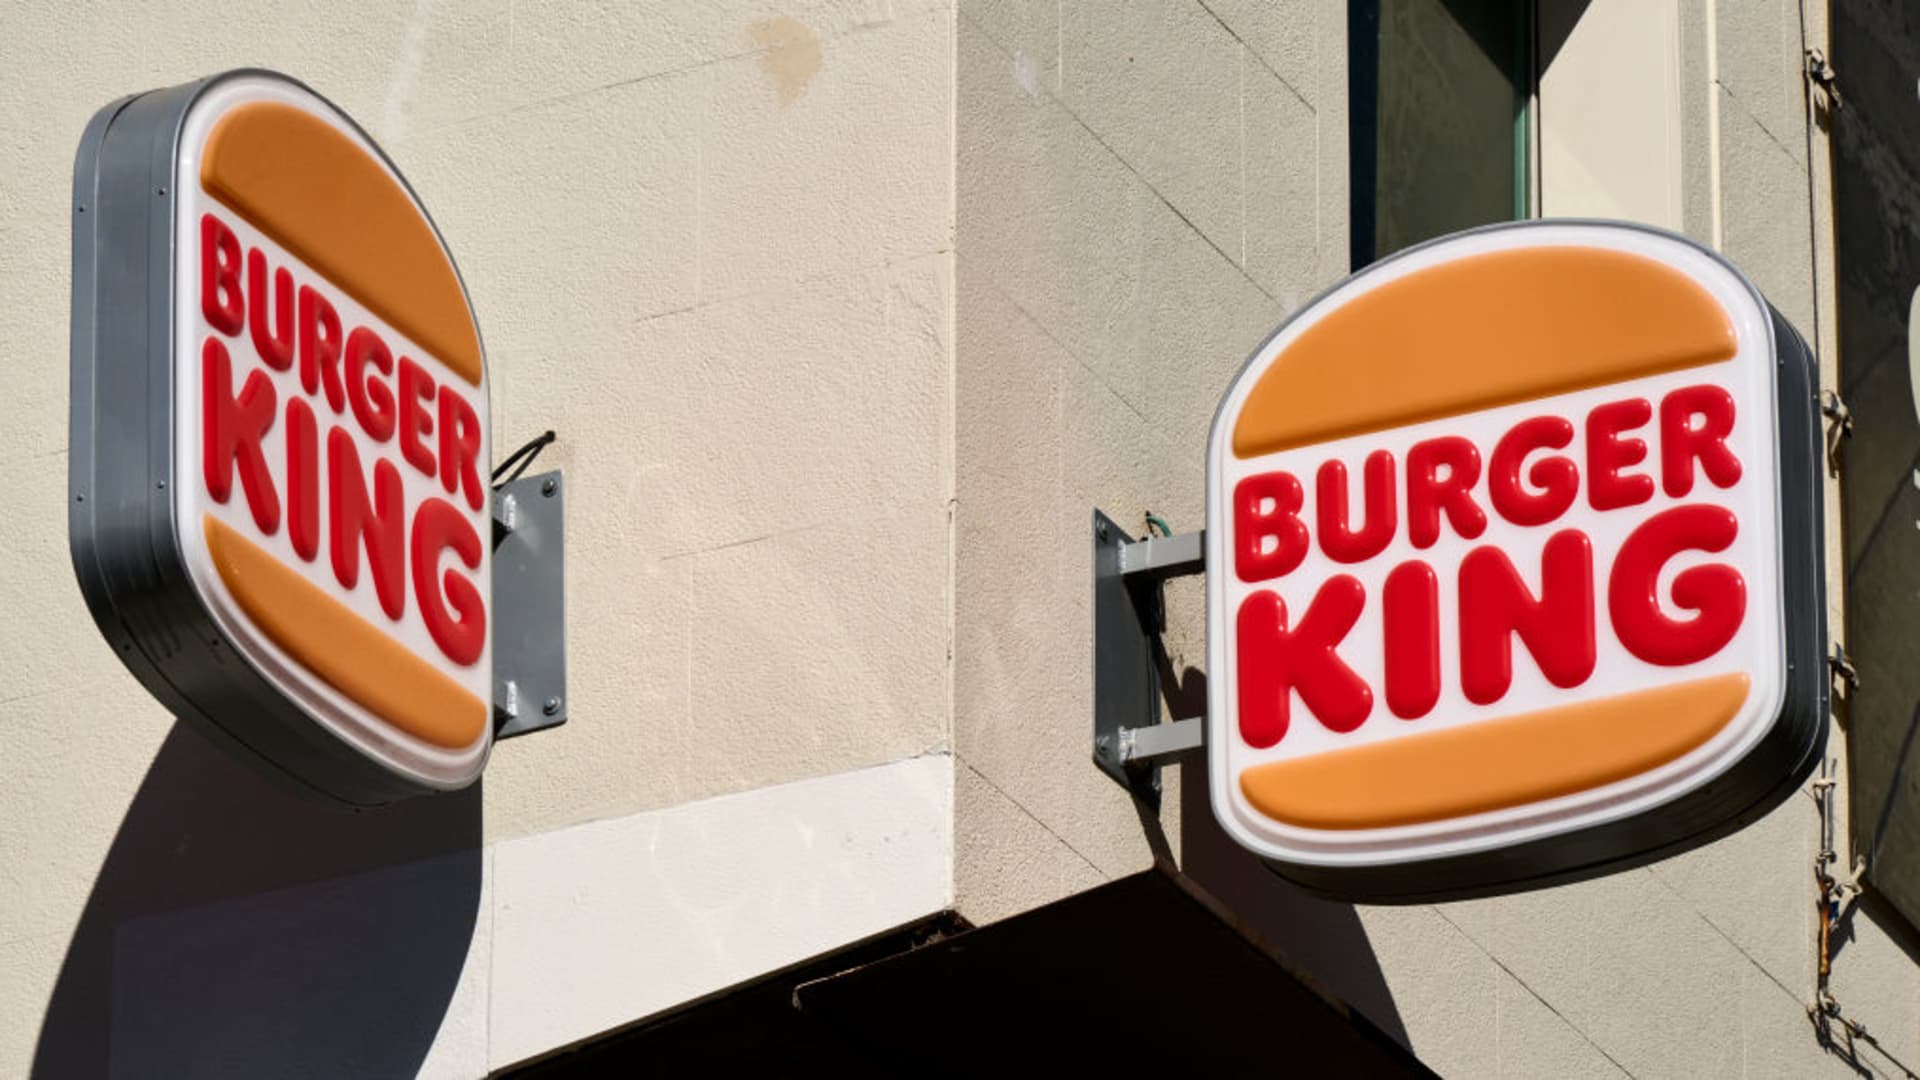 Burger King 0 million plans to revive US sales with remodeling, advertising